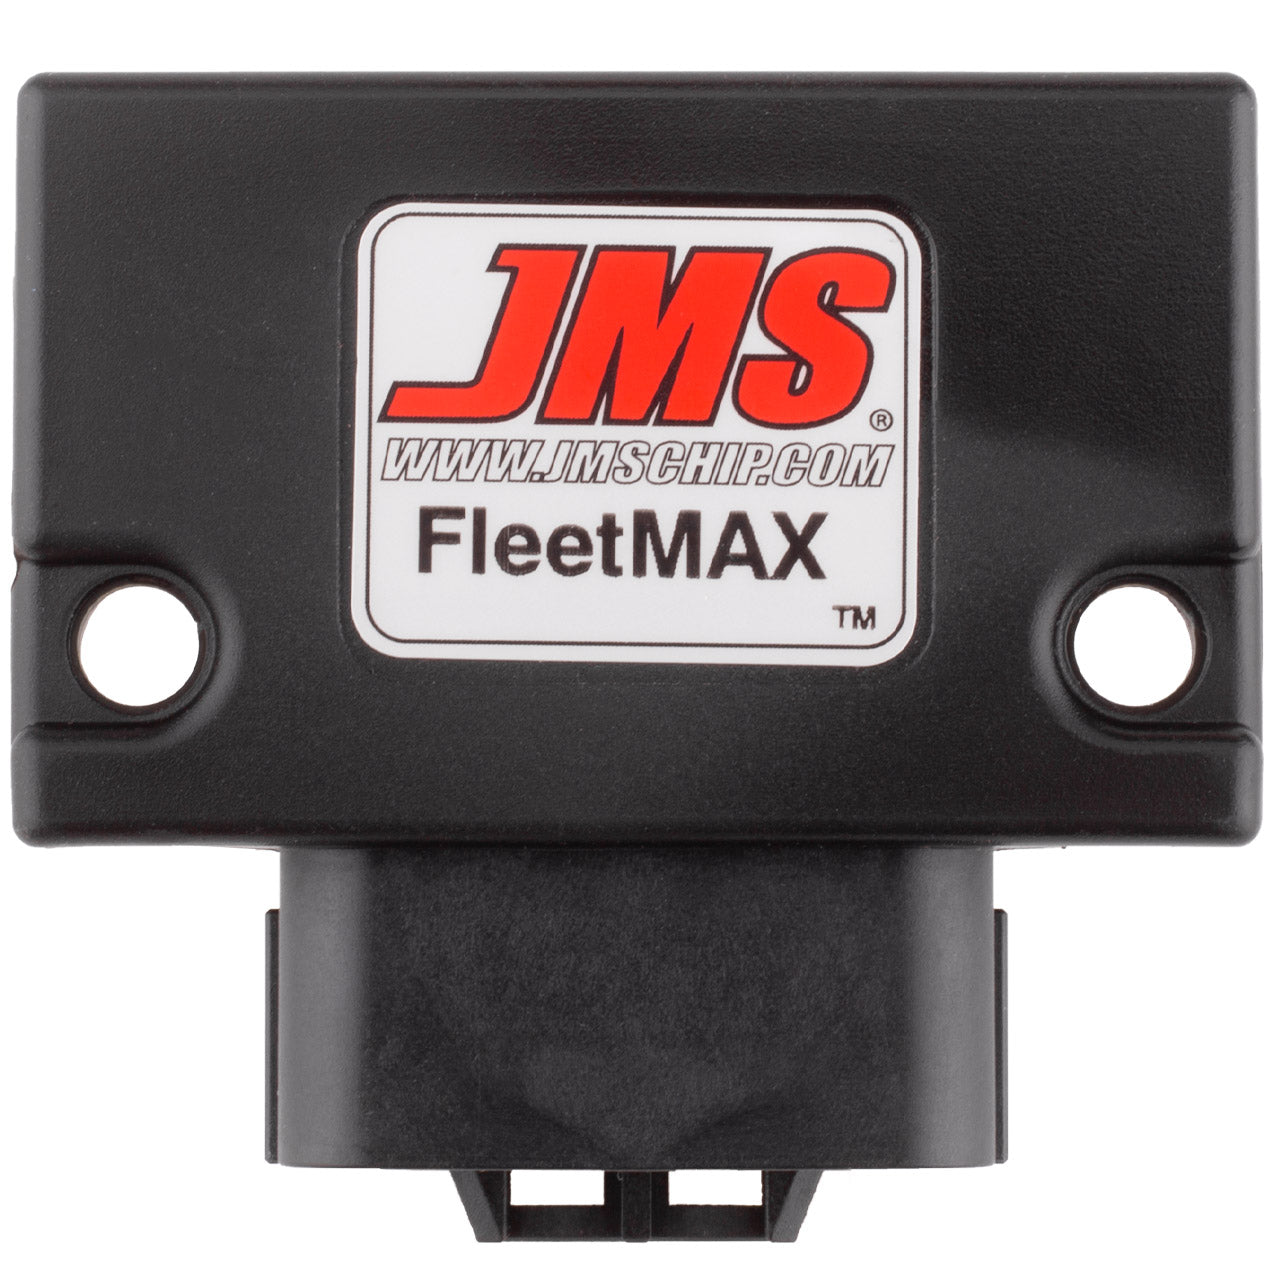 JMS FleetMAX Speed Control Device. Plug and Play for some 2008 - 2021 Dodge Chrysler and Jeep Vehicles with electronic throttle control FX71114DCX